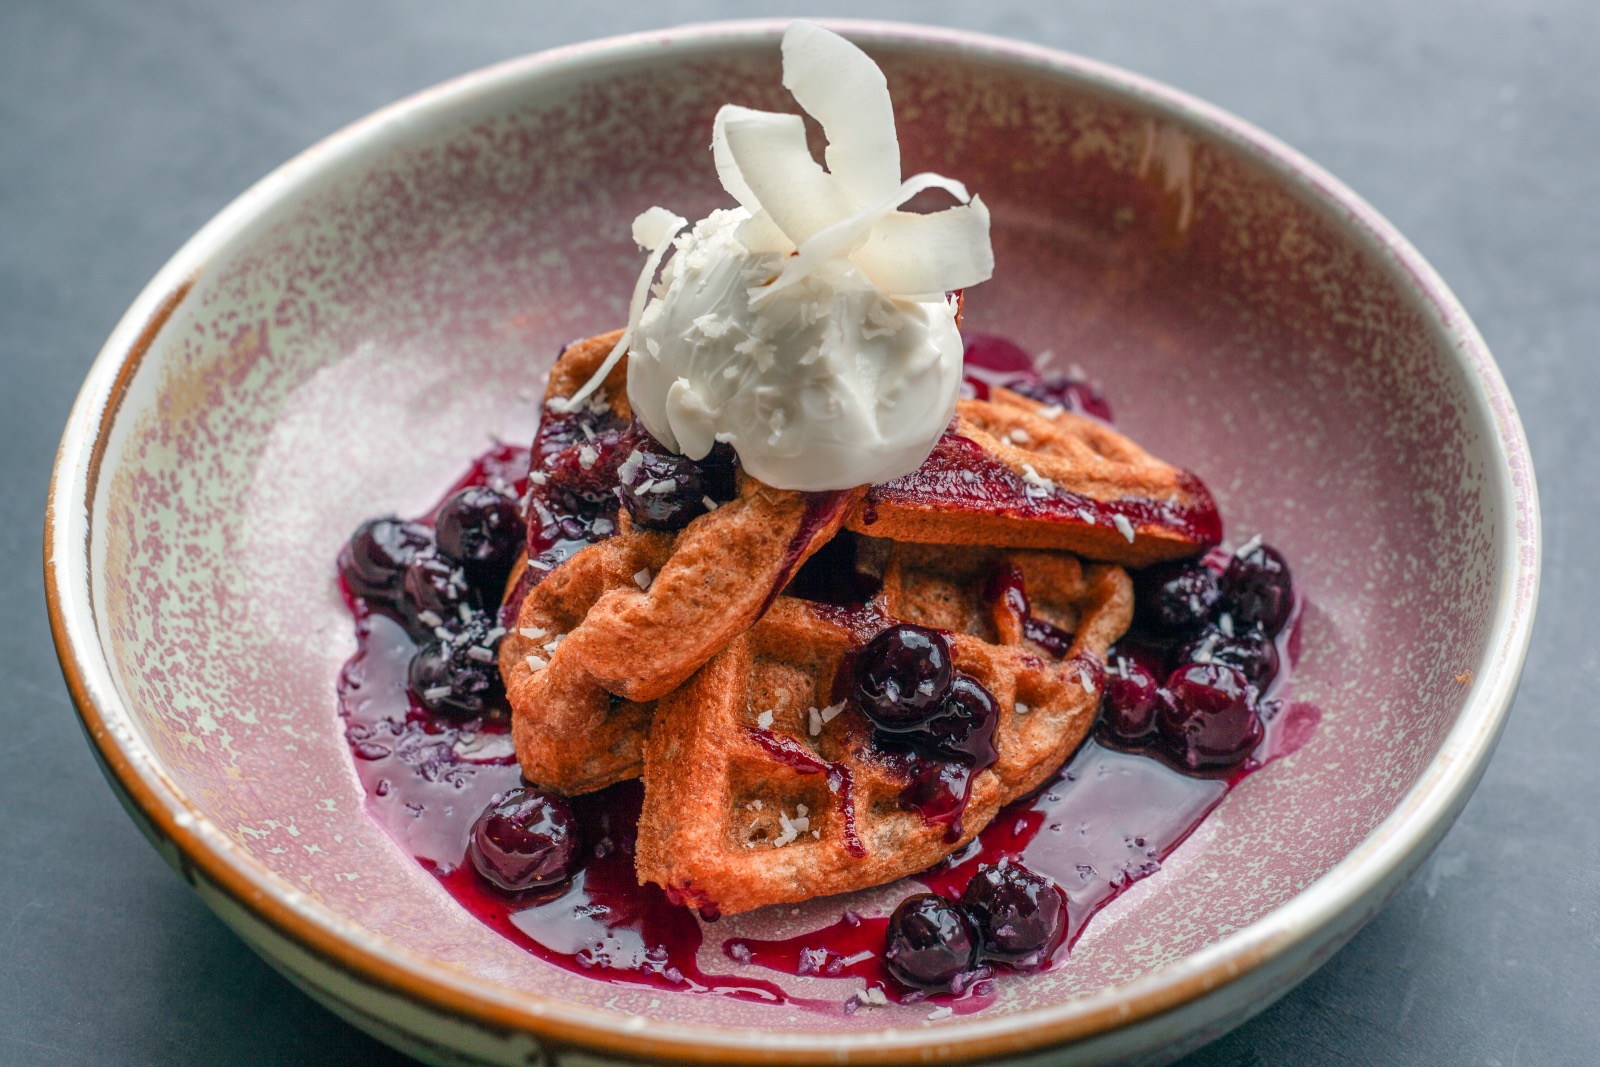 London Vegan Cafe, The Guava Kitchen, Takes Veganuary to New Heights with an Exclusive Vegan Bottomless Brunch Experience